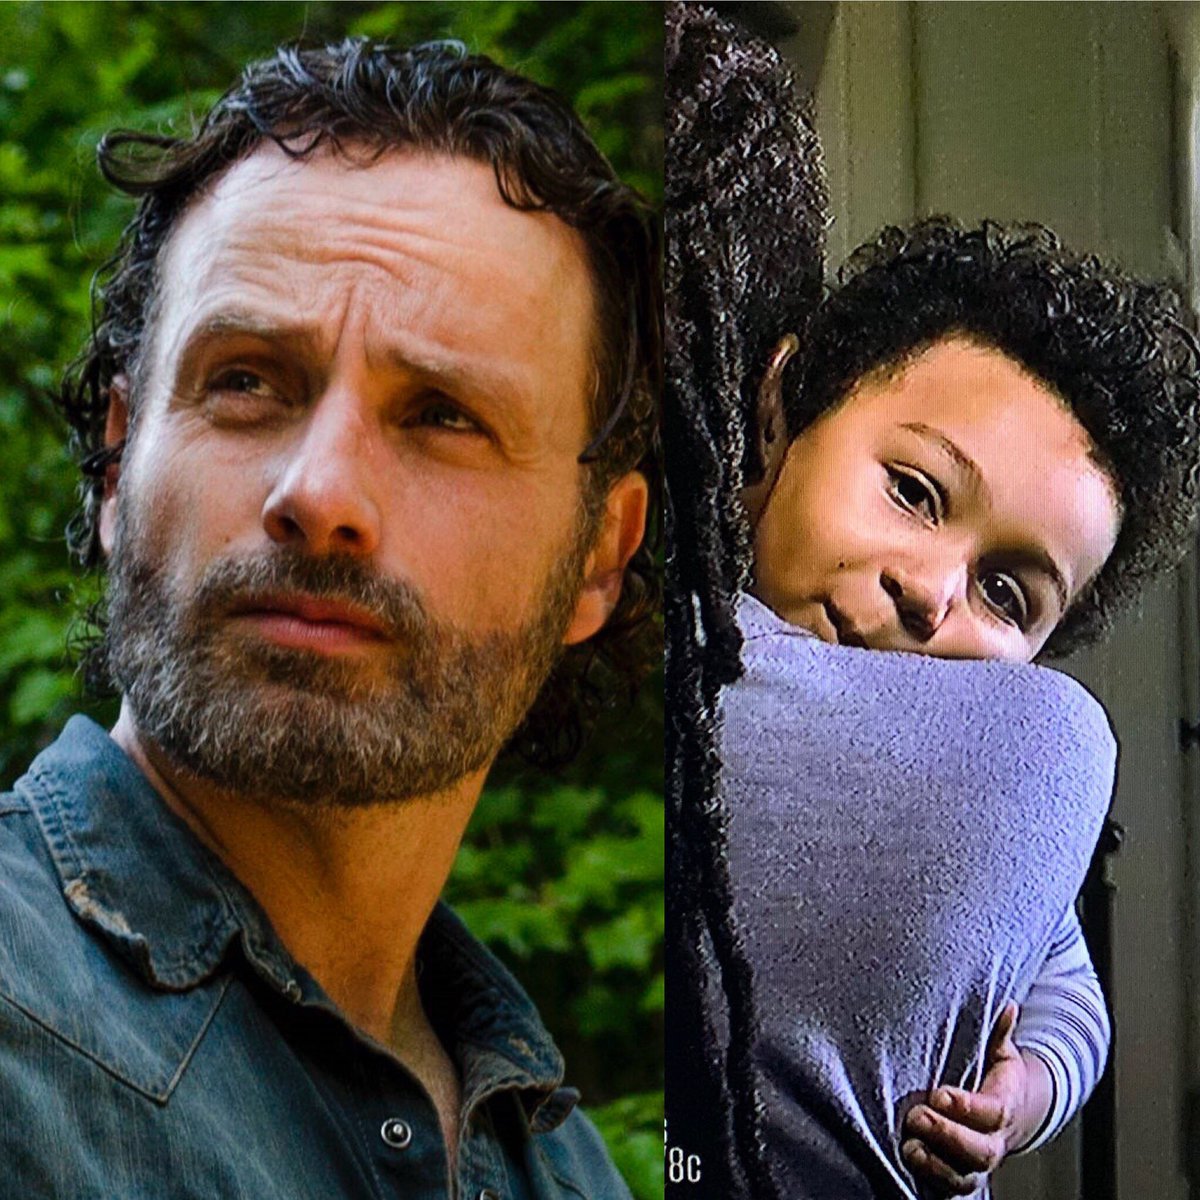 Father and son sharing a mole on the same spot 😭❤️❤️❤️#richonne #WalkingDead #RJGrimes #Michonne